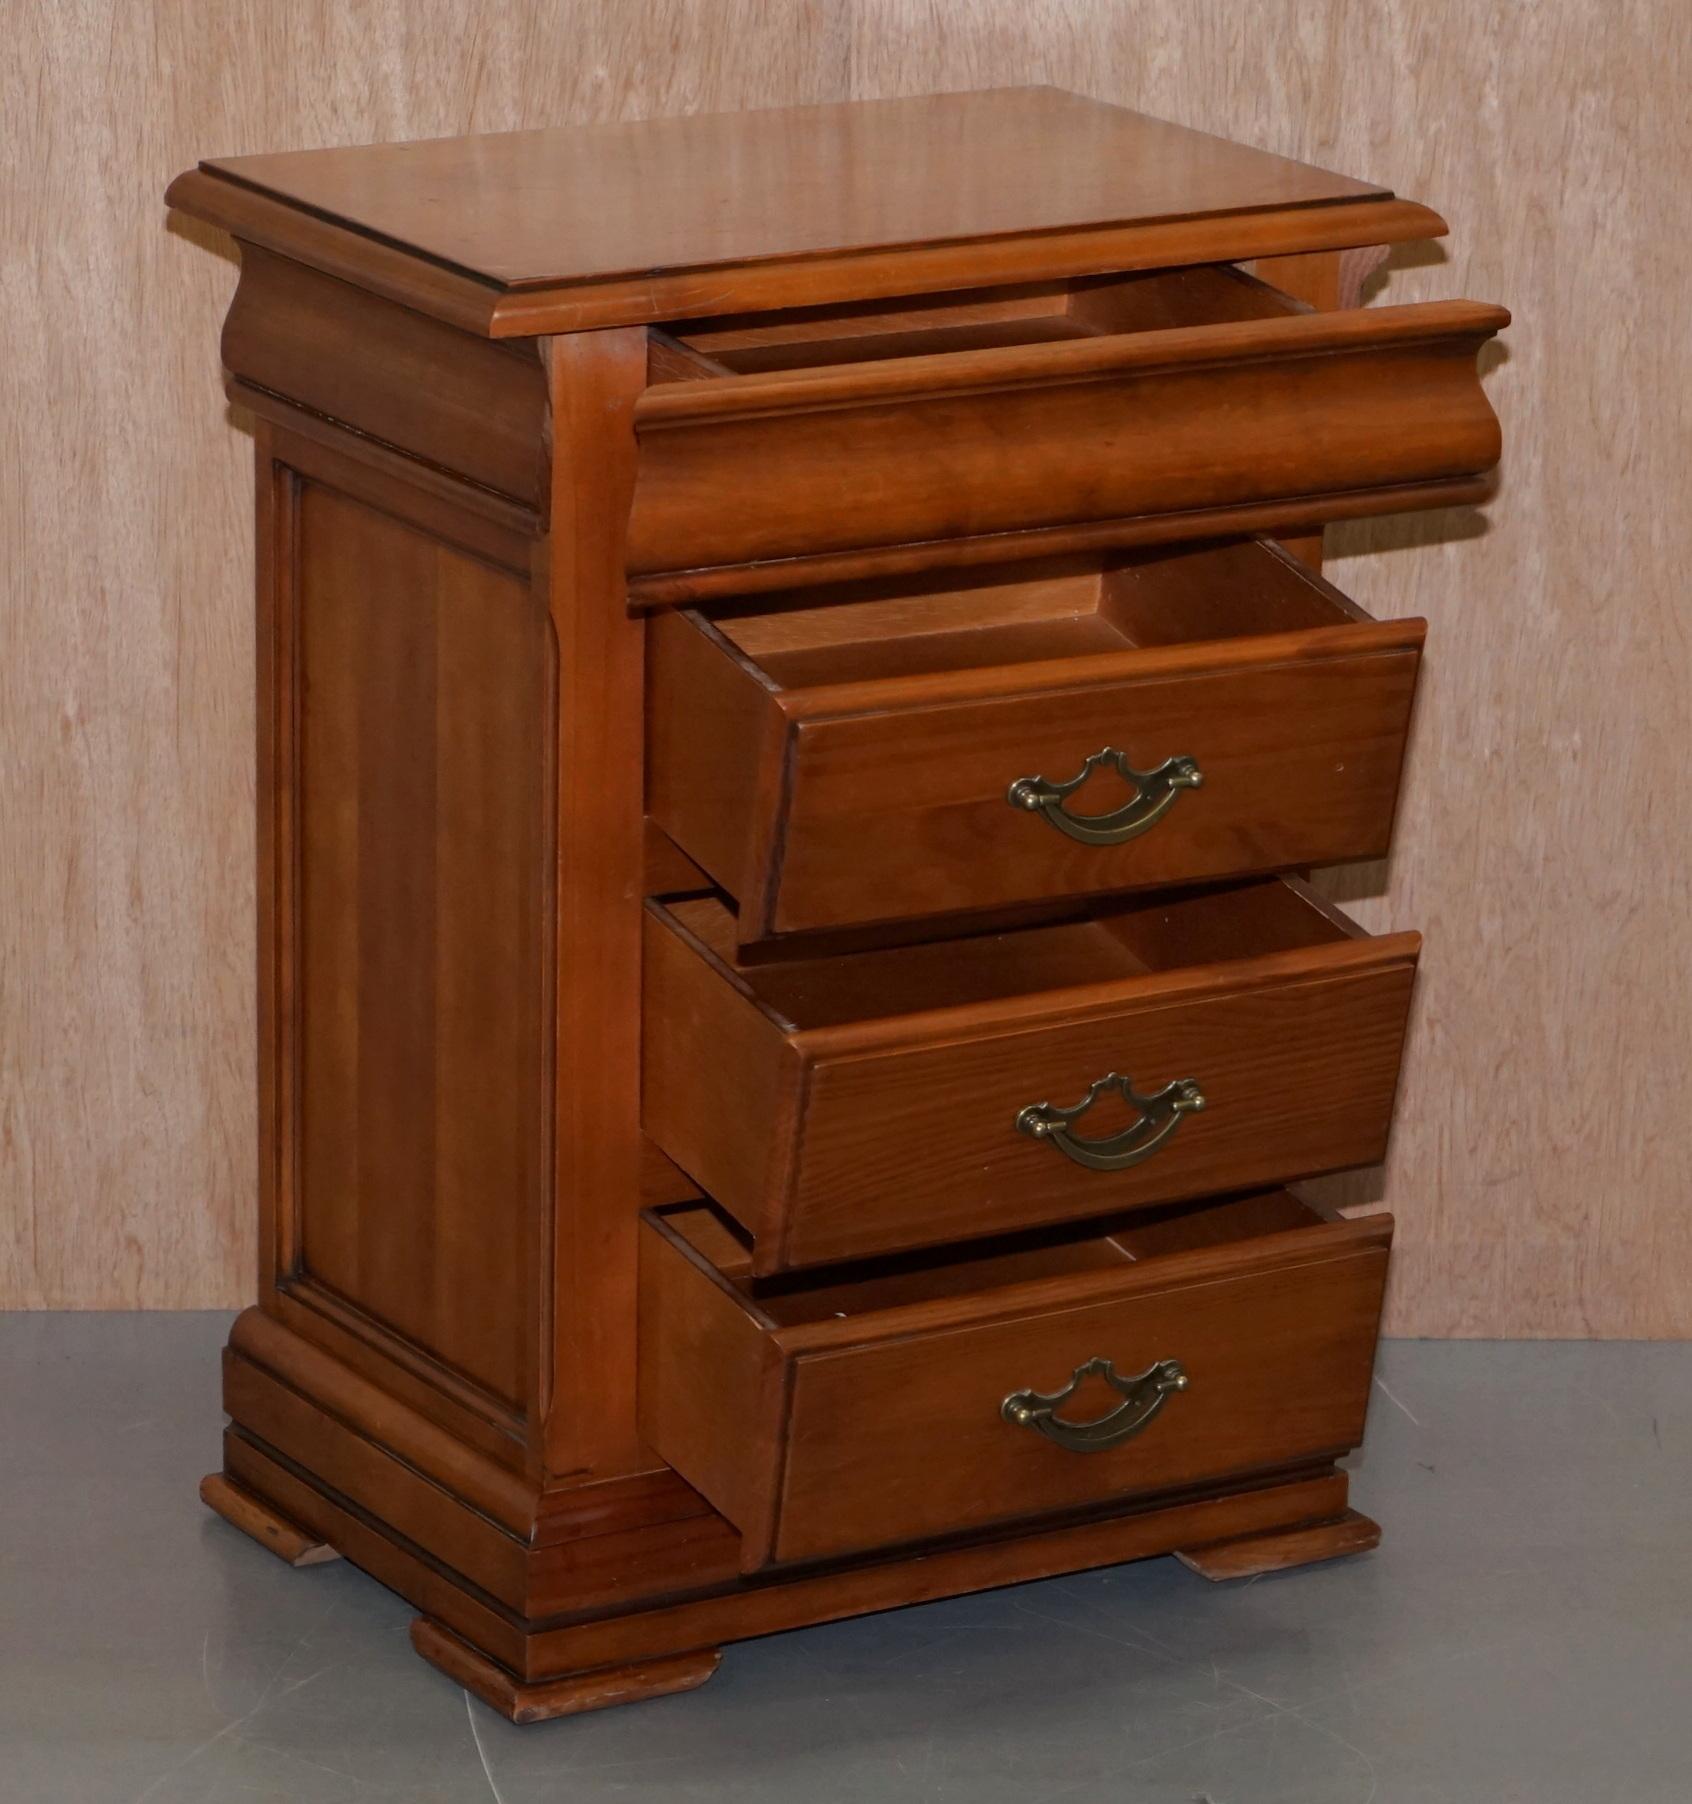 Pair of Bedside Table Drawers with Four Drawers Each, Cherry Color Wood 2